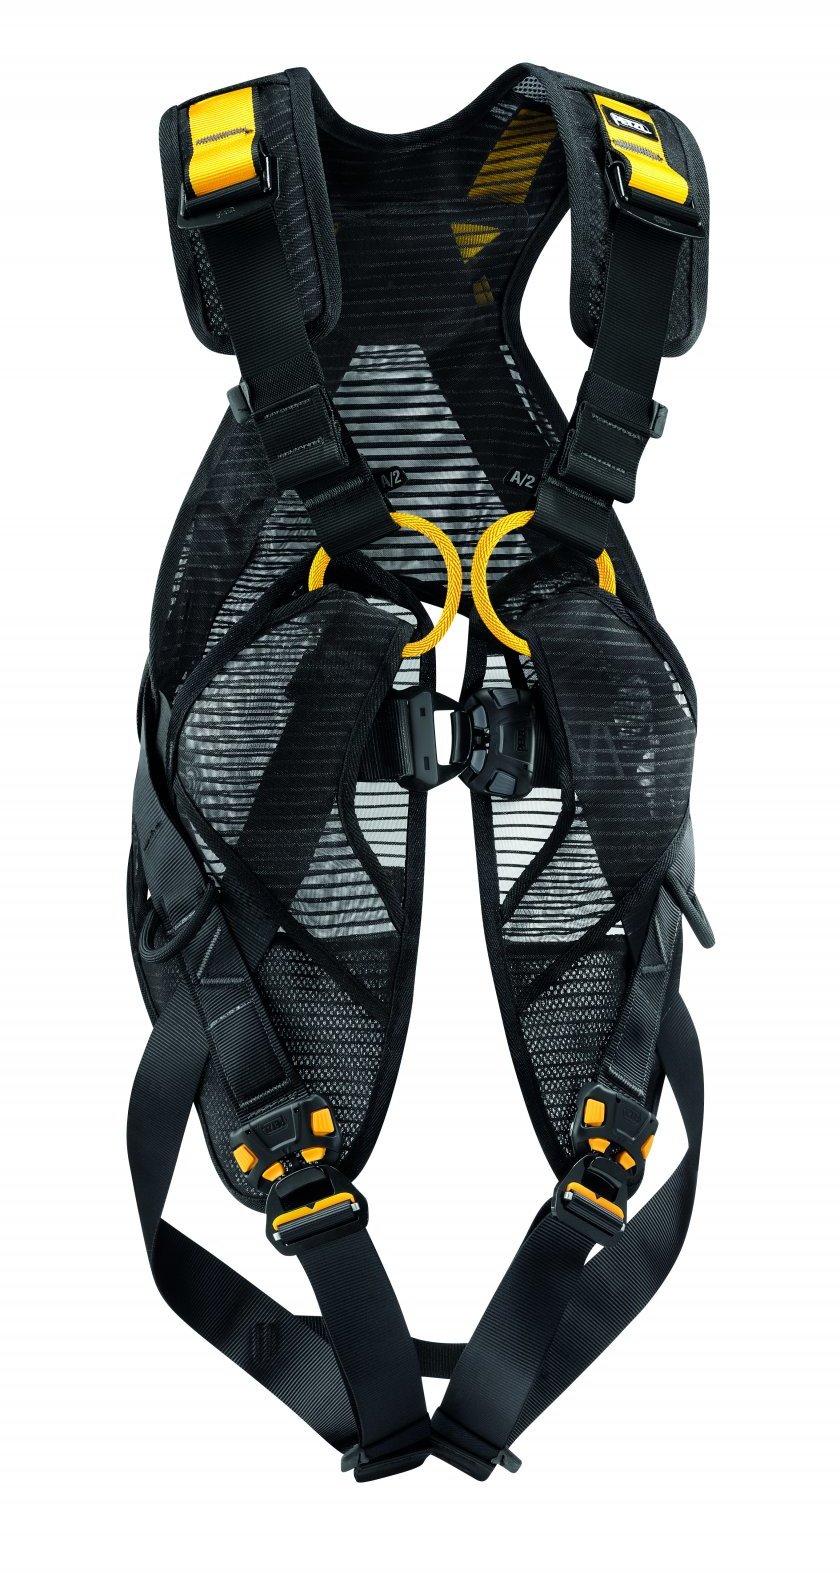 Petzl NEWTON EASYFIT Full Body Harness With Fast Buckles and Vest, ANSI & CSA (2020)